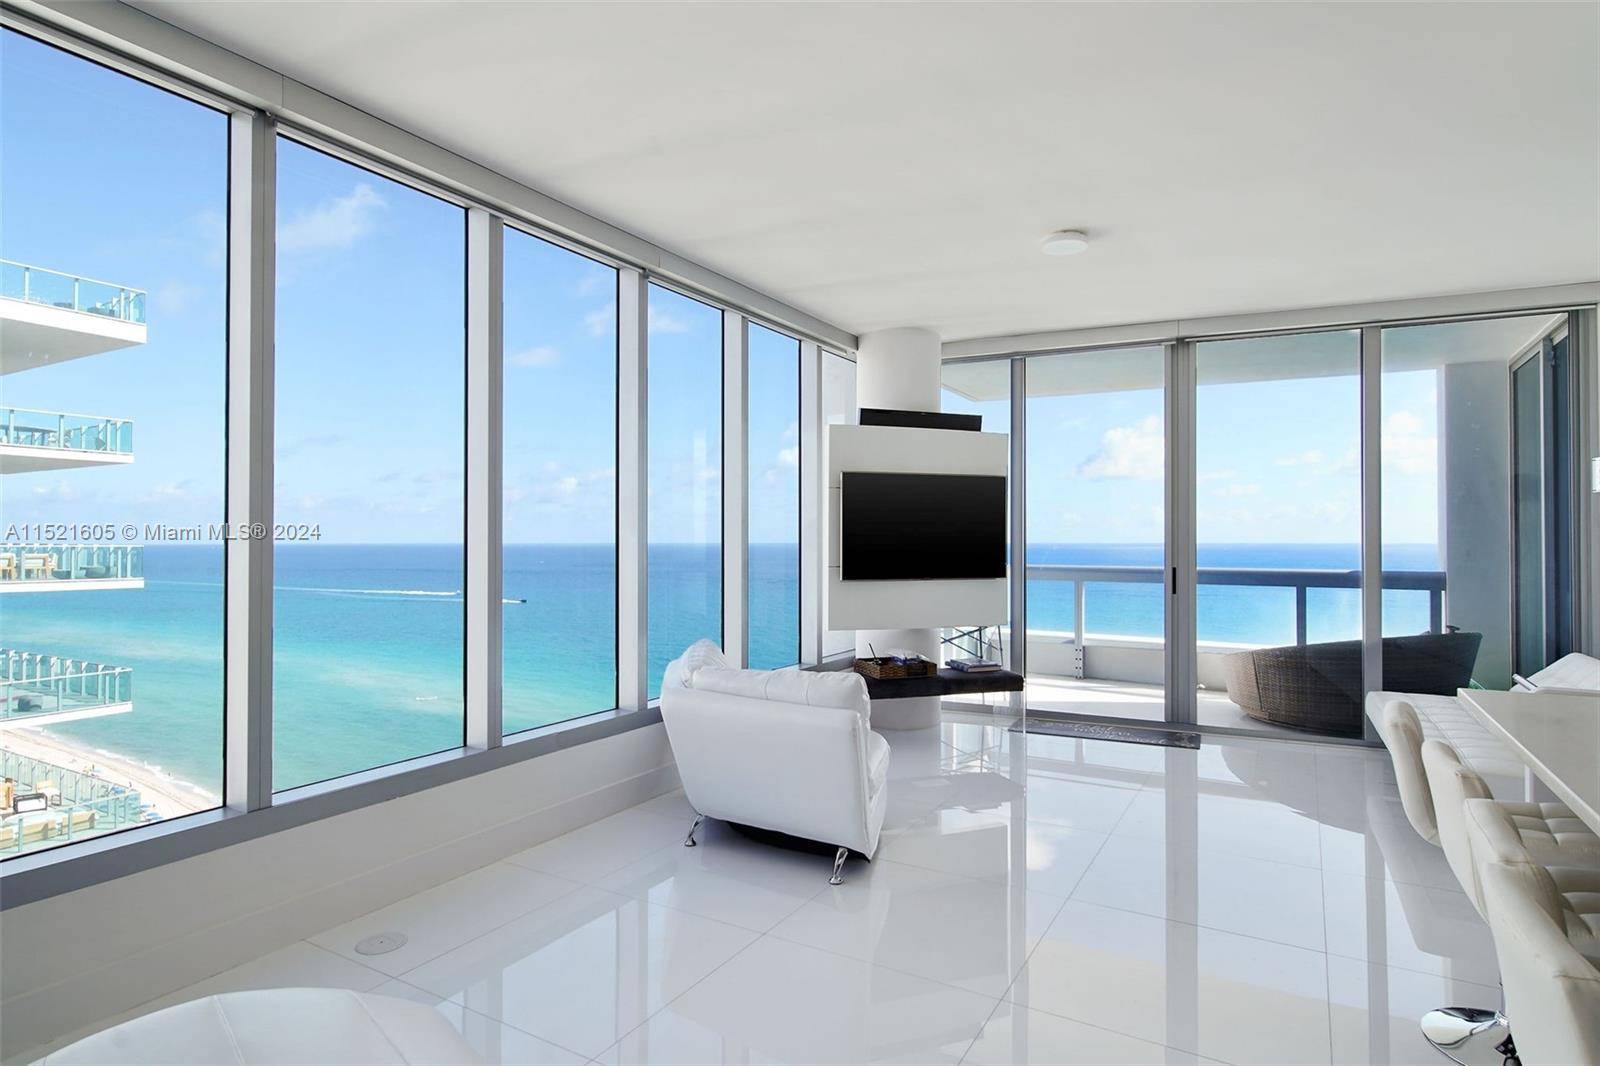 This stunning 2 bed 2 bath corner unit at the Carillon Beach Resort in Miami Beach offers breathtaking ocean views from every angle.